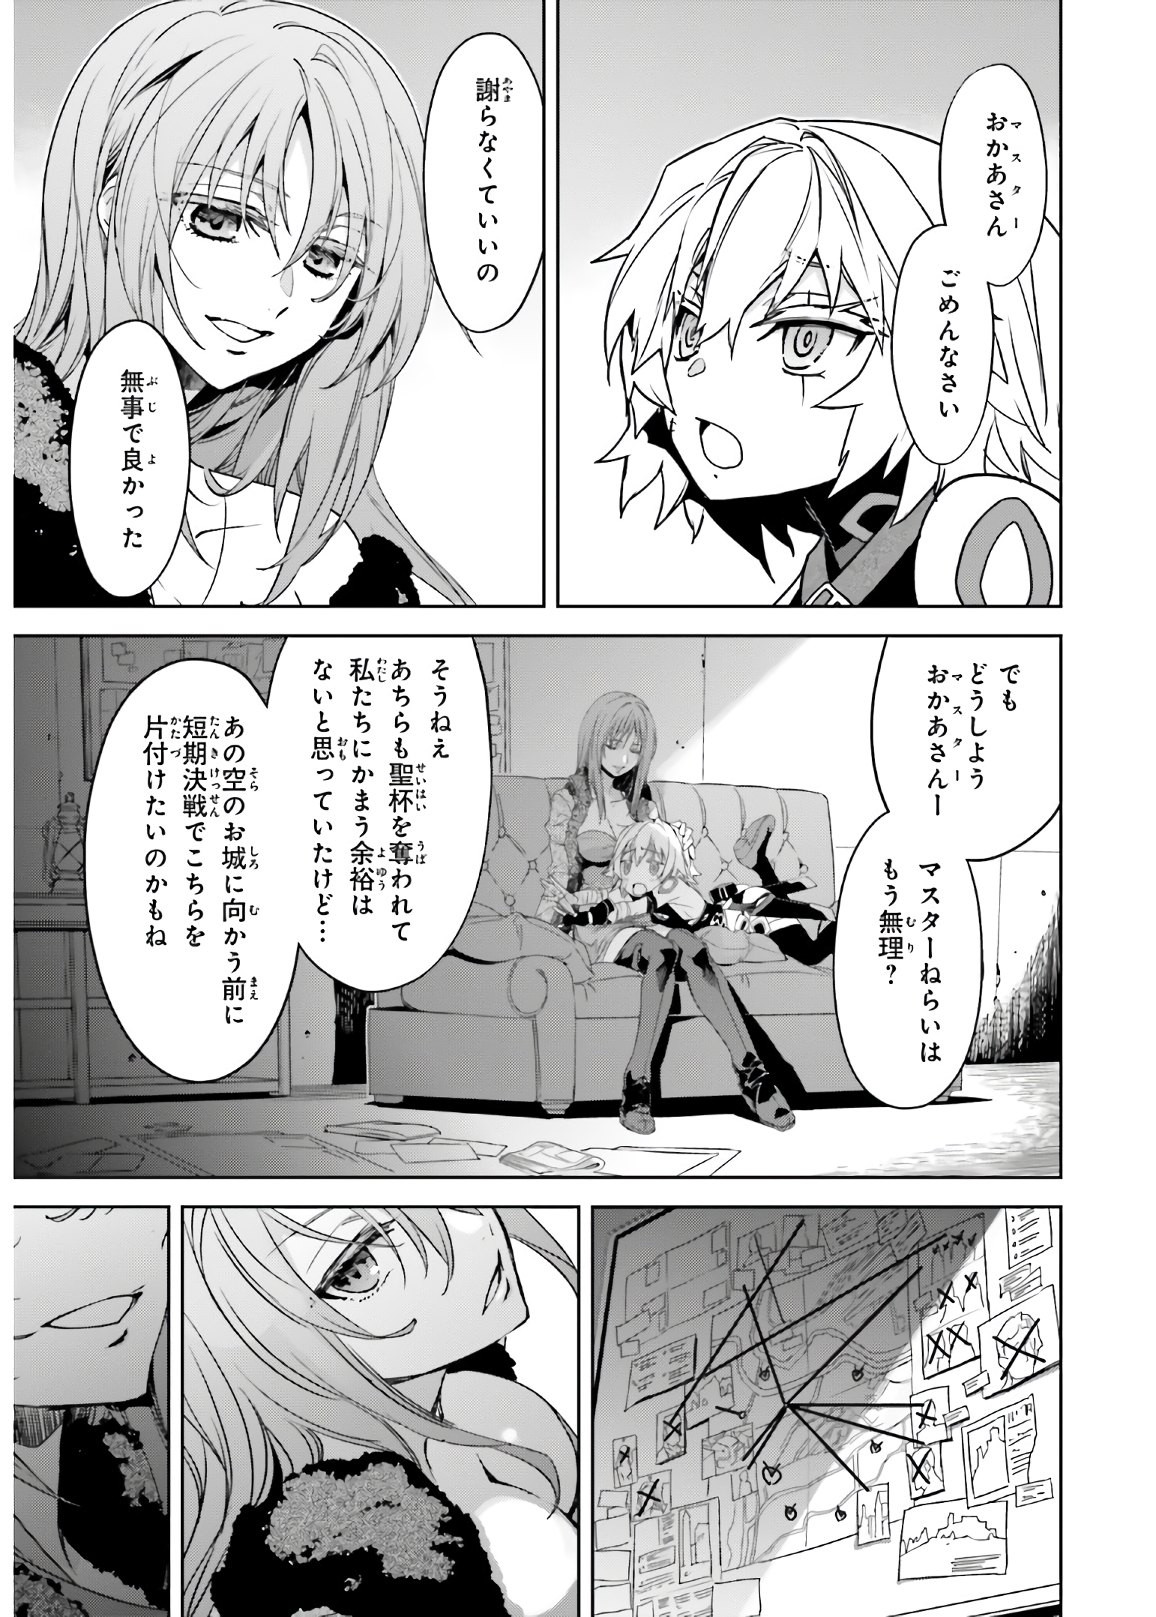 Fate-Apocrypha - Chapter 46 - Page 15